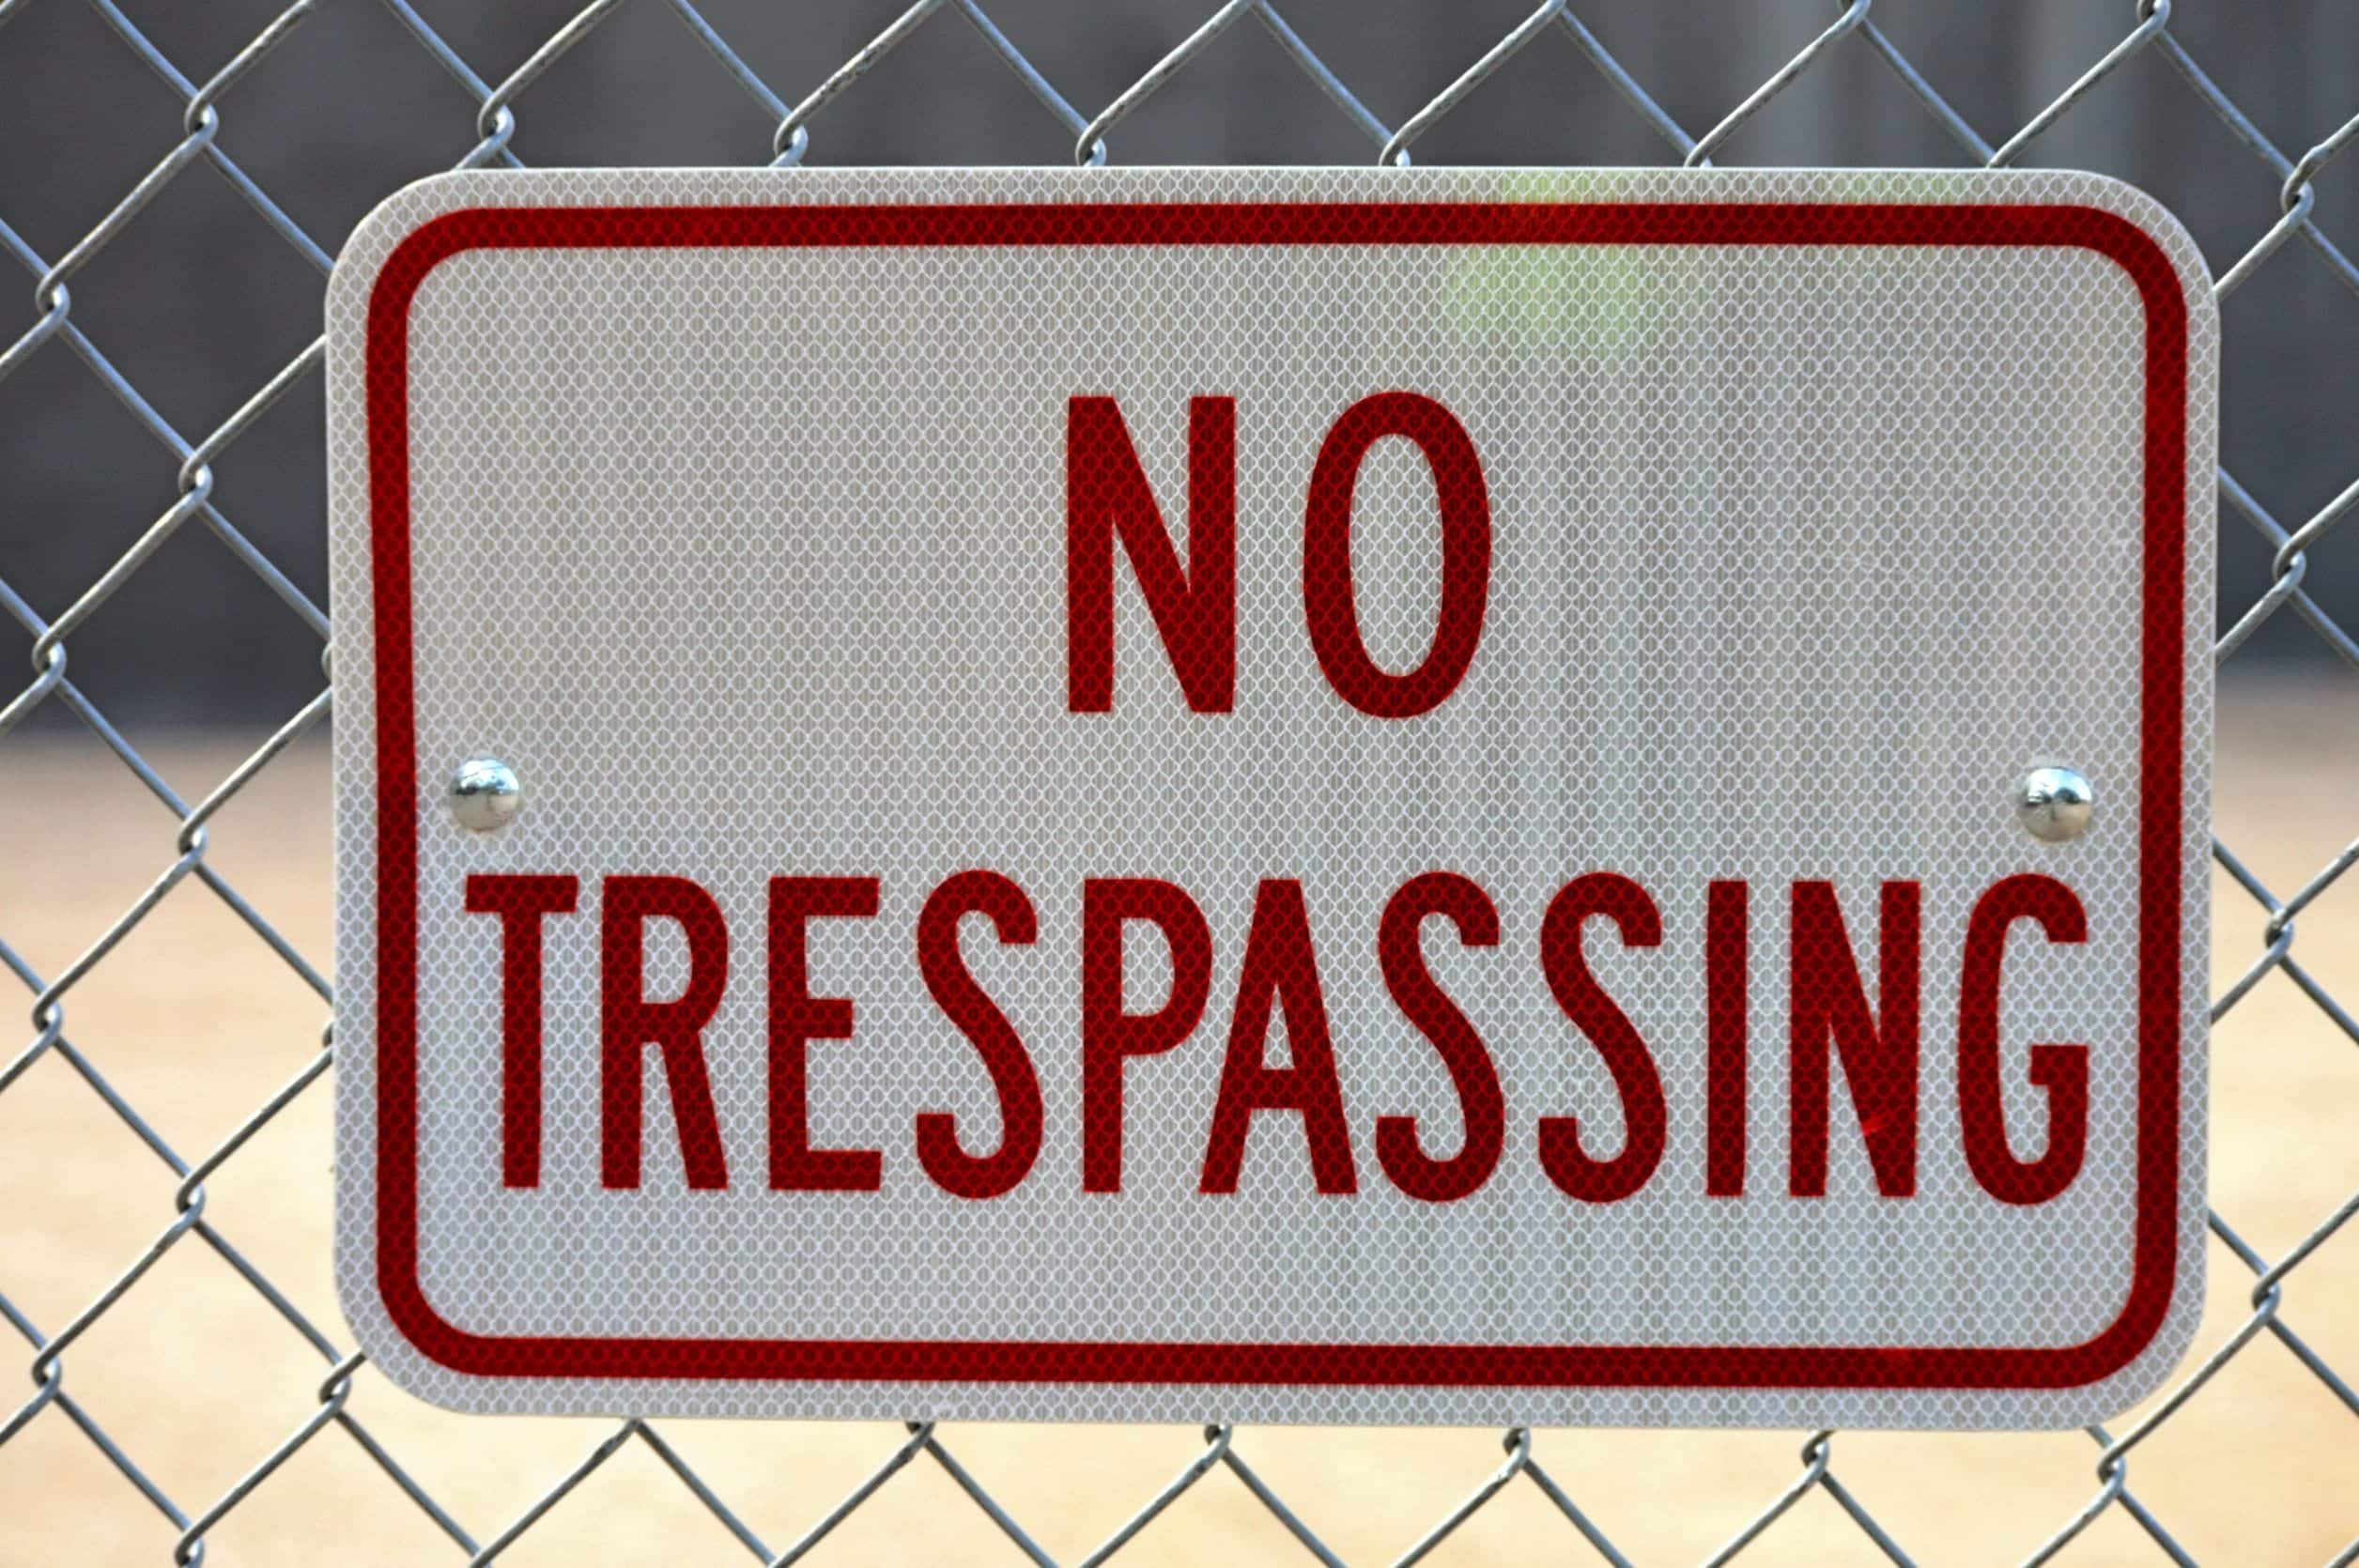 What Is Criminal Trespassing?